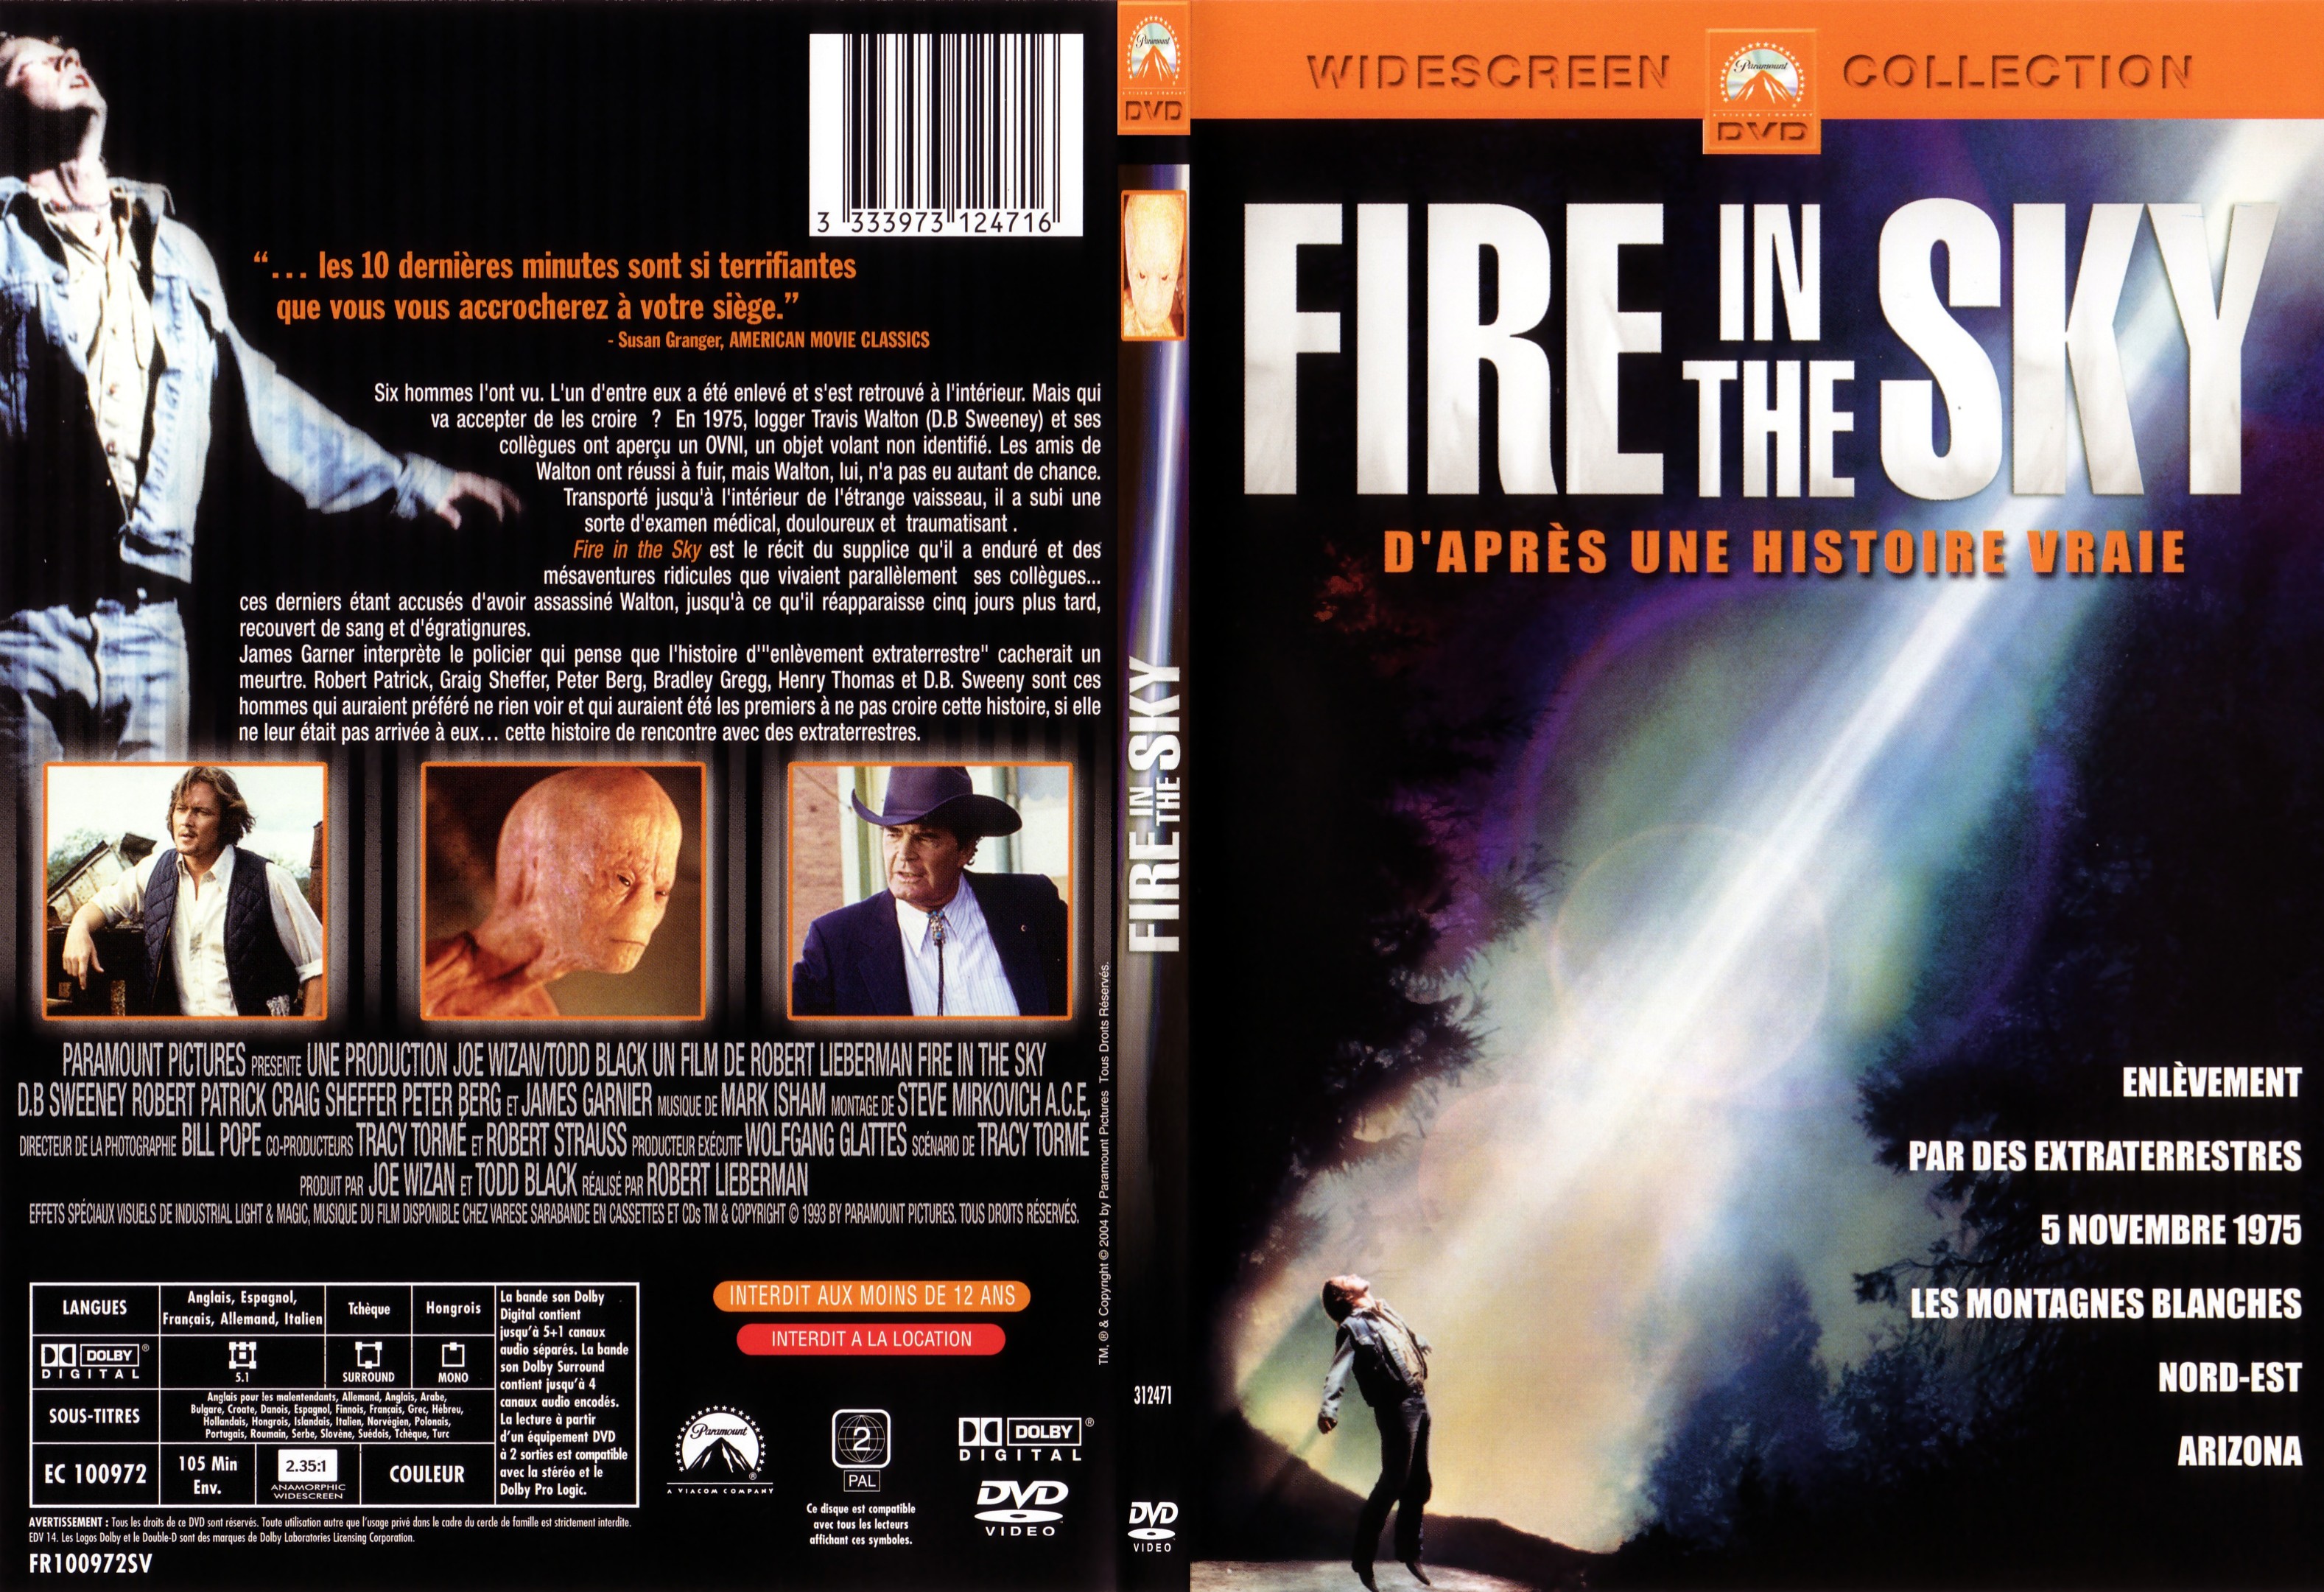 Jaquette DVD Fire in the sky - SLIM